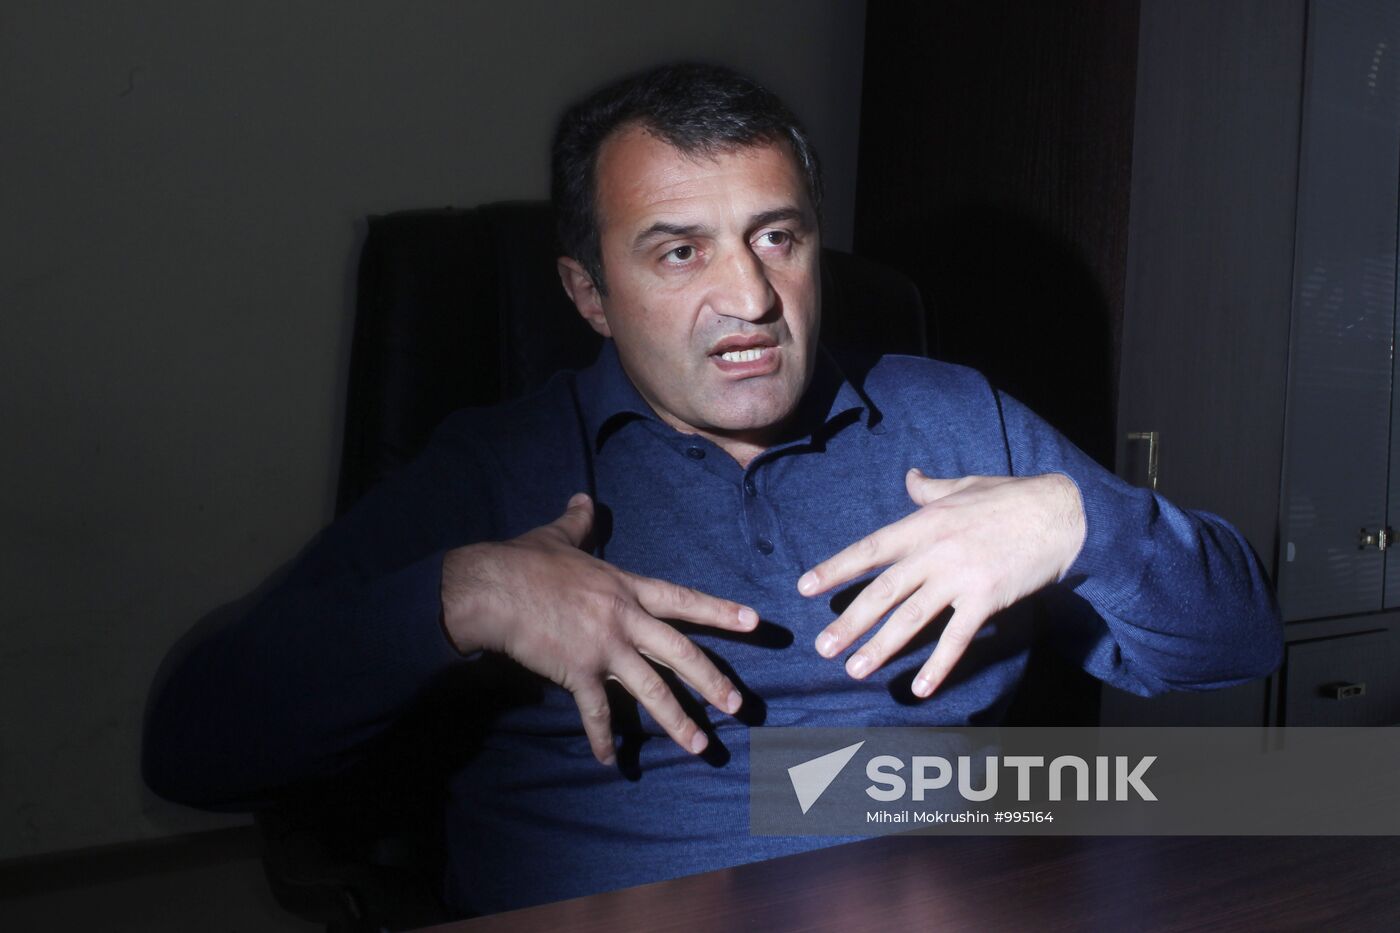 South Ossetian presidential candidate Anatoly Bibilov